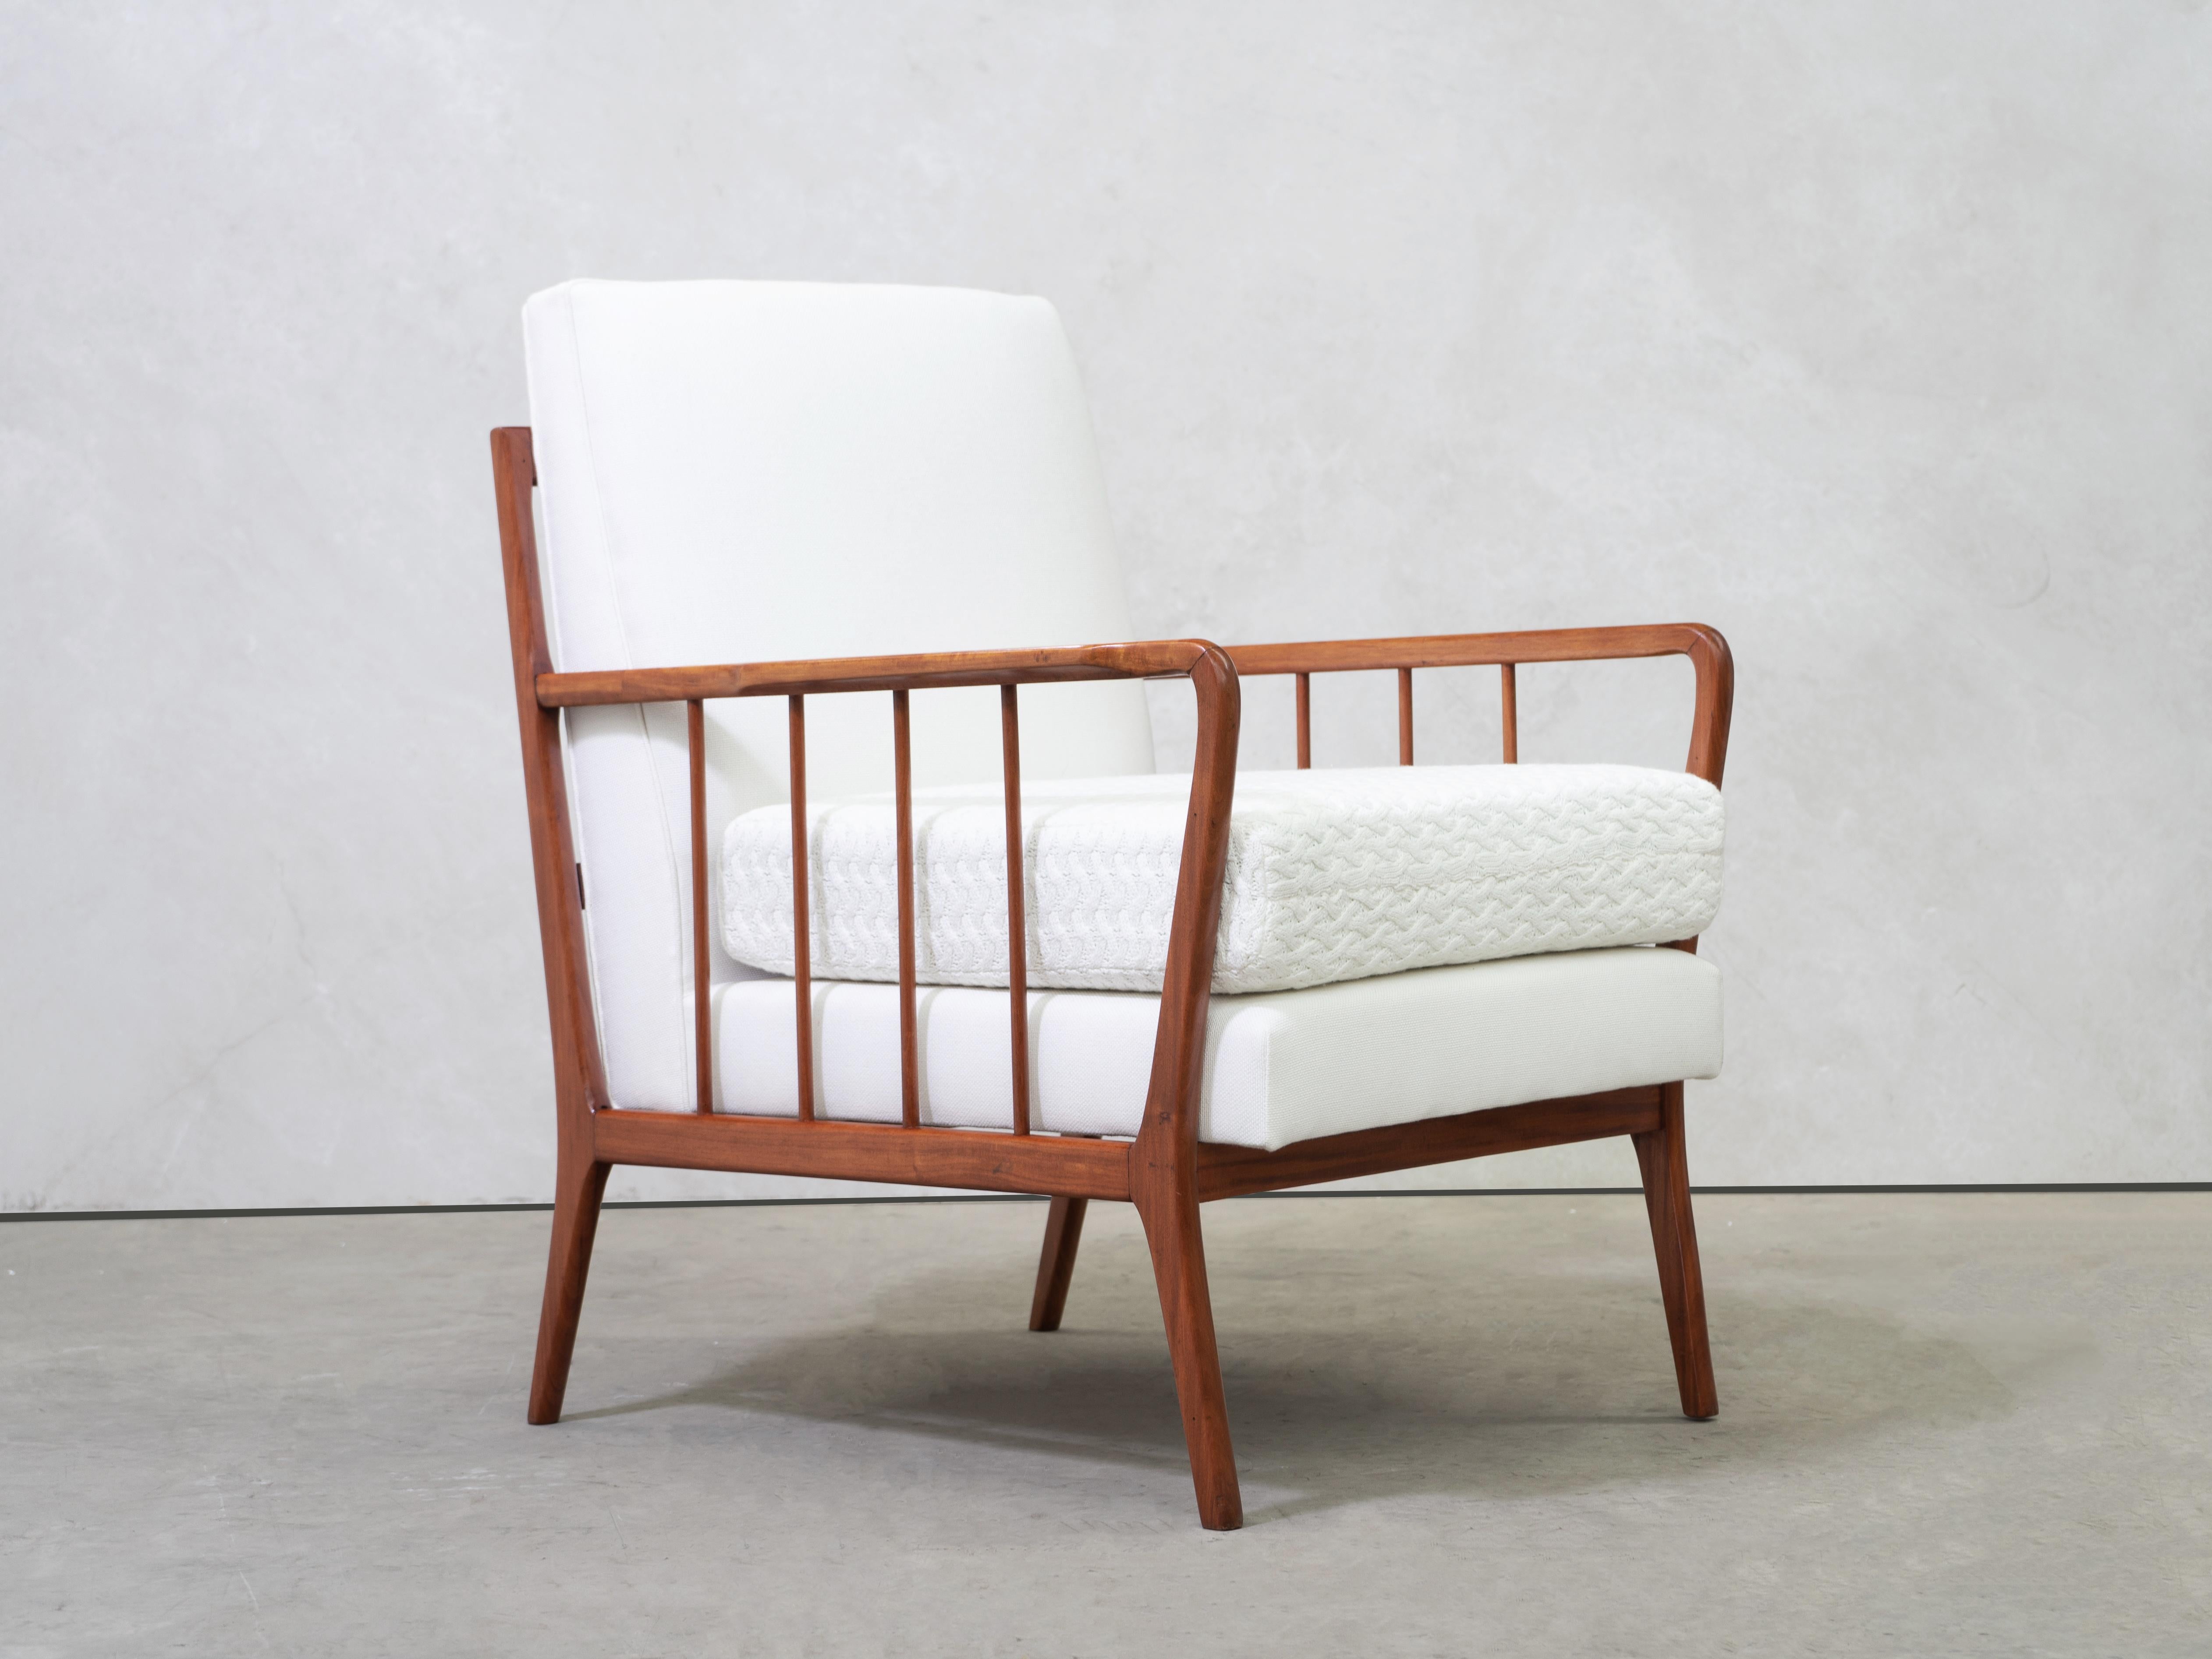 Mid-20th Century Pair of Armchairs by Rino Levi, Brazilian MidCentury Design For Sale